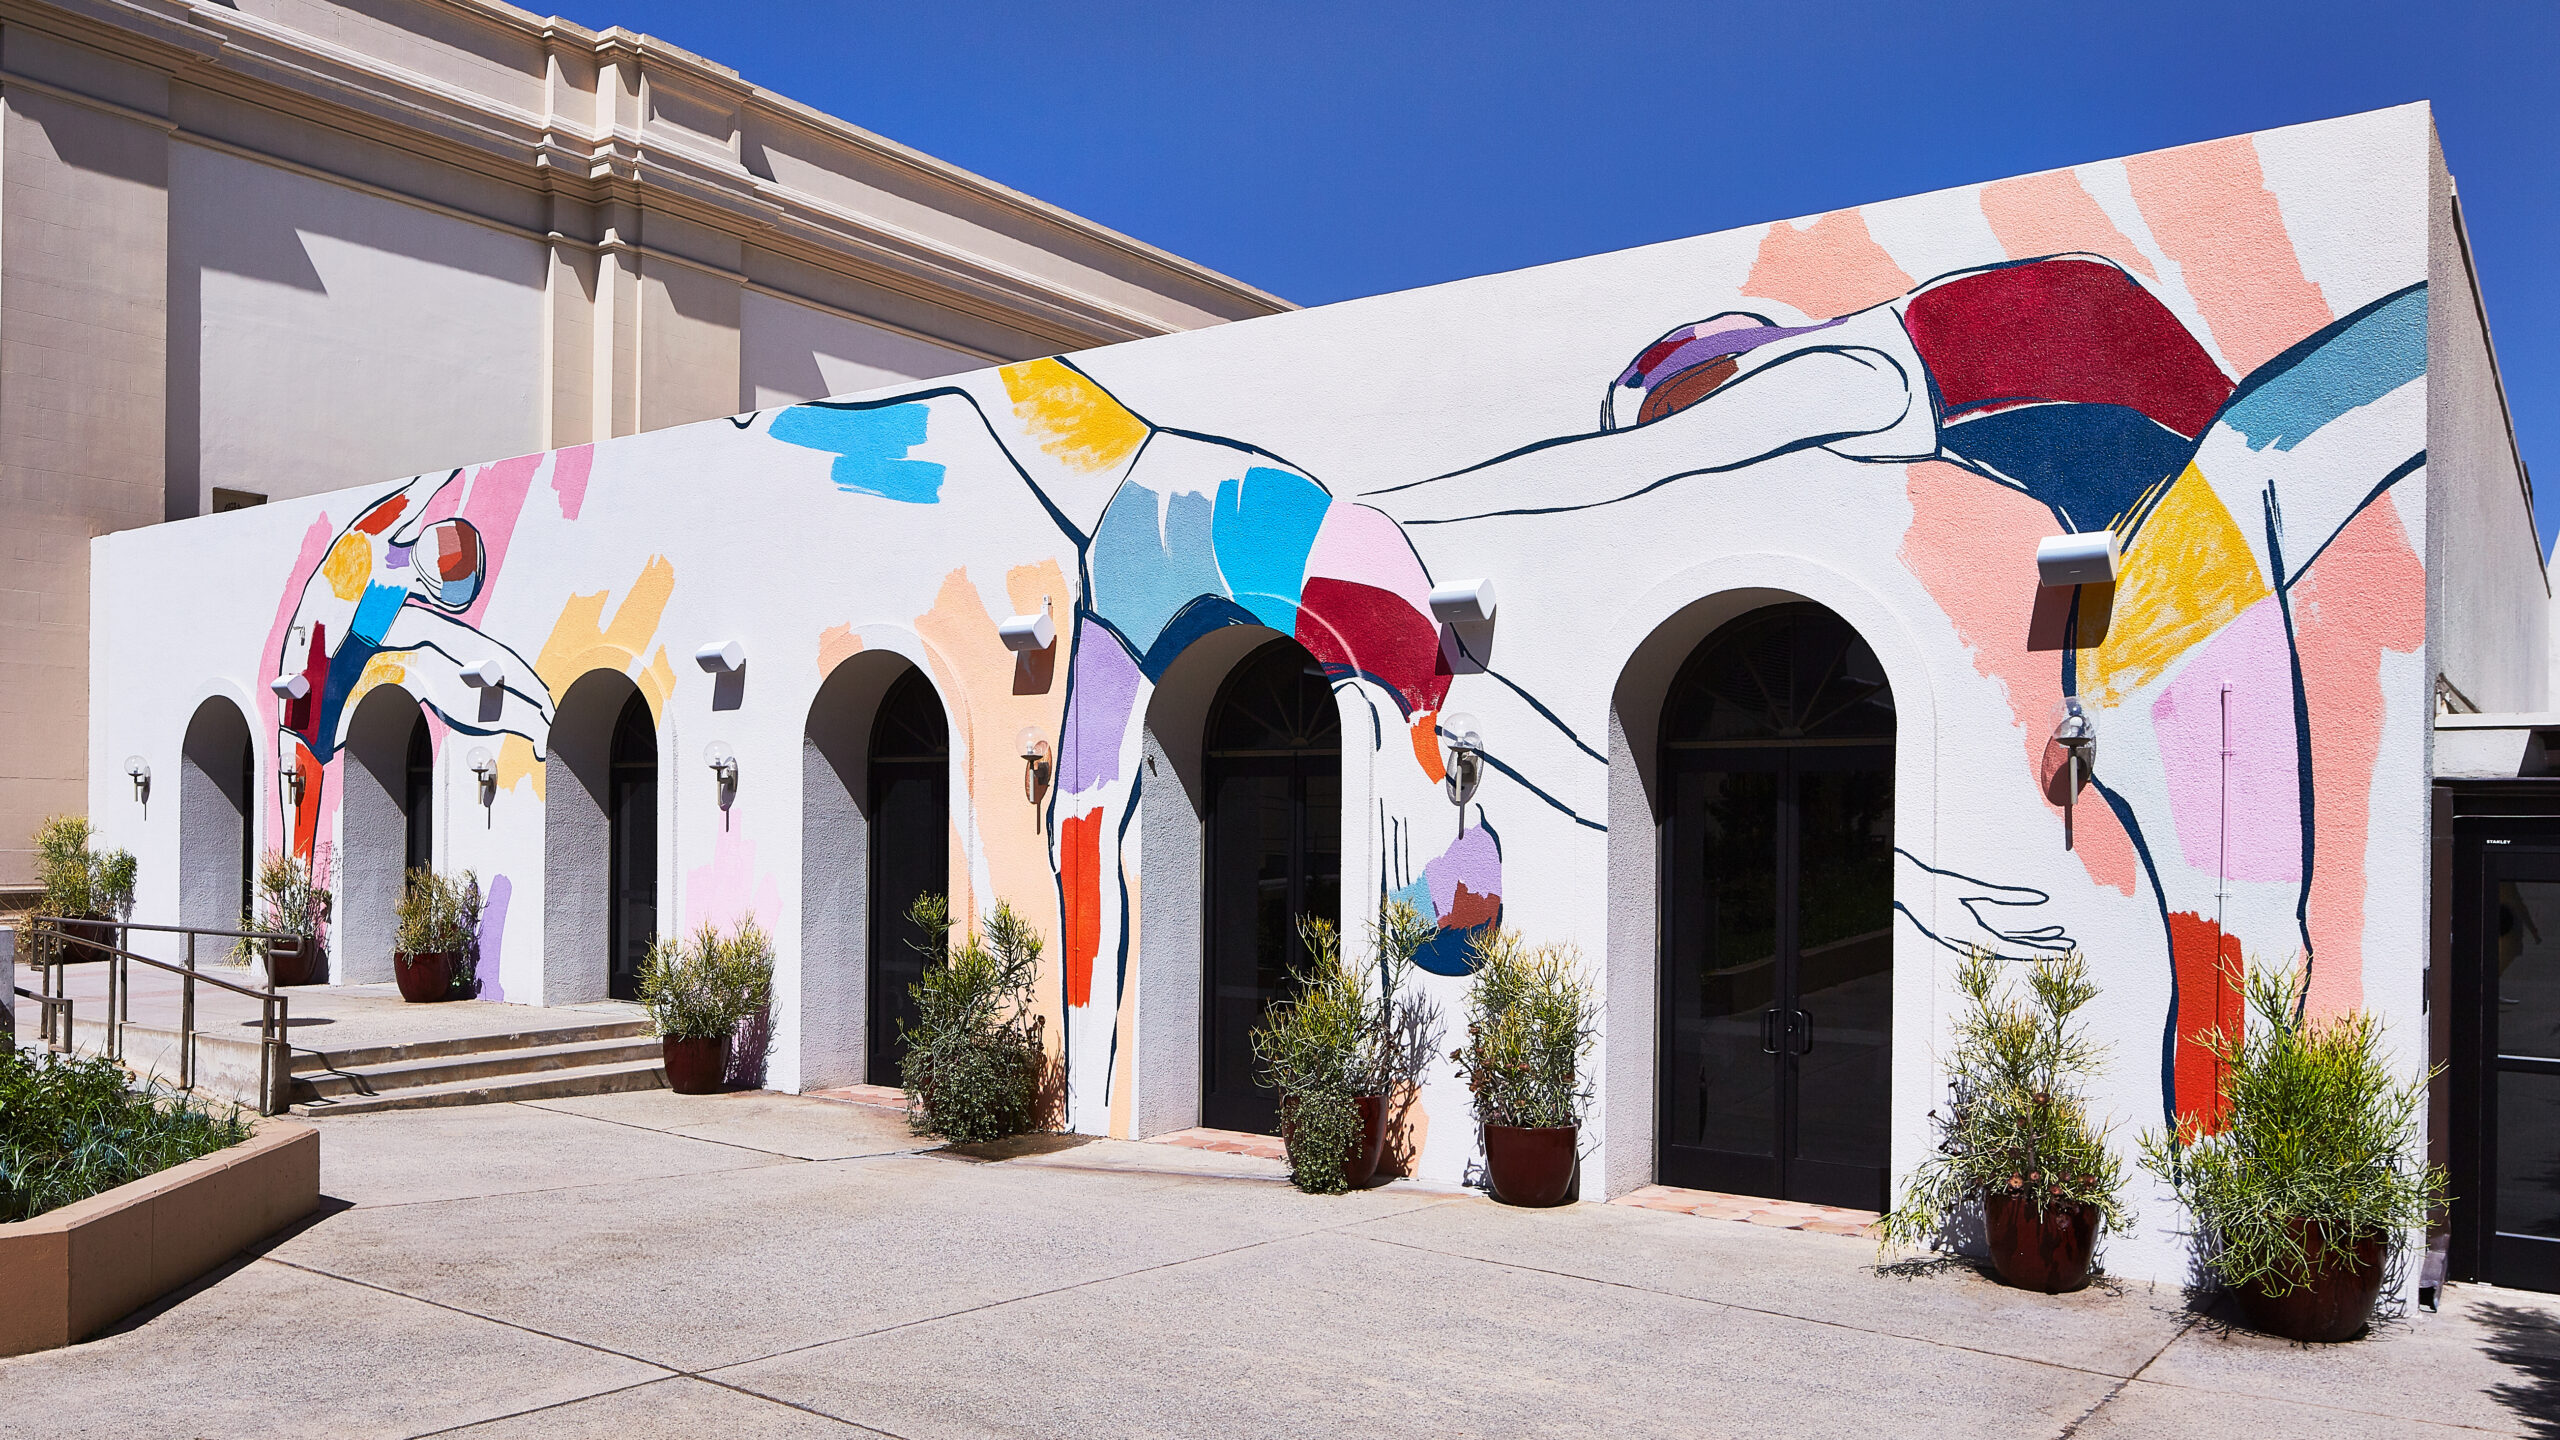 A mural by Leah Tumerman at Hotel Dena featuring colorful silhouettes dancing